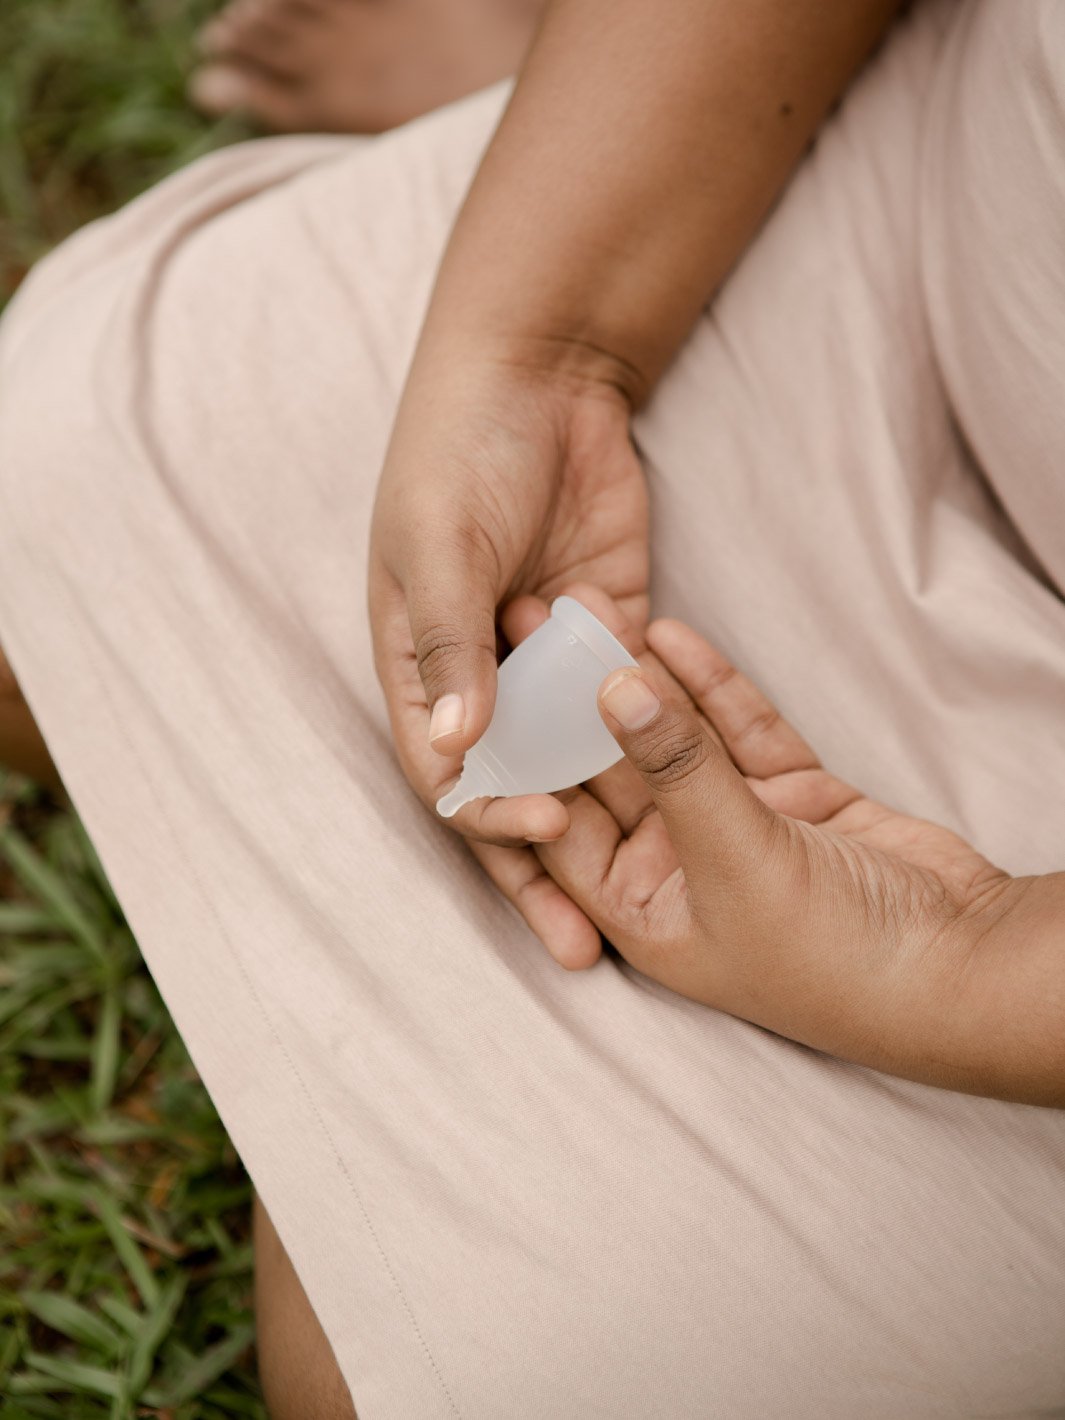 menstrual cup being held in a girl's hand